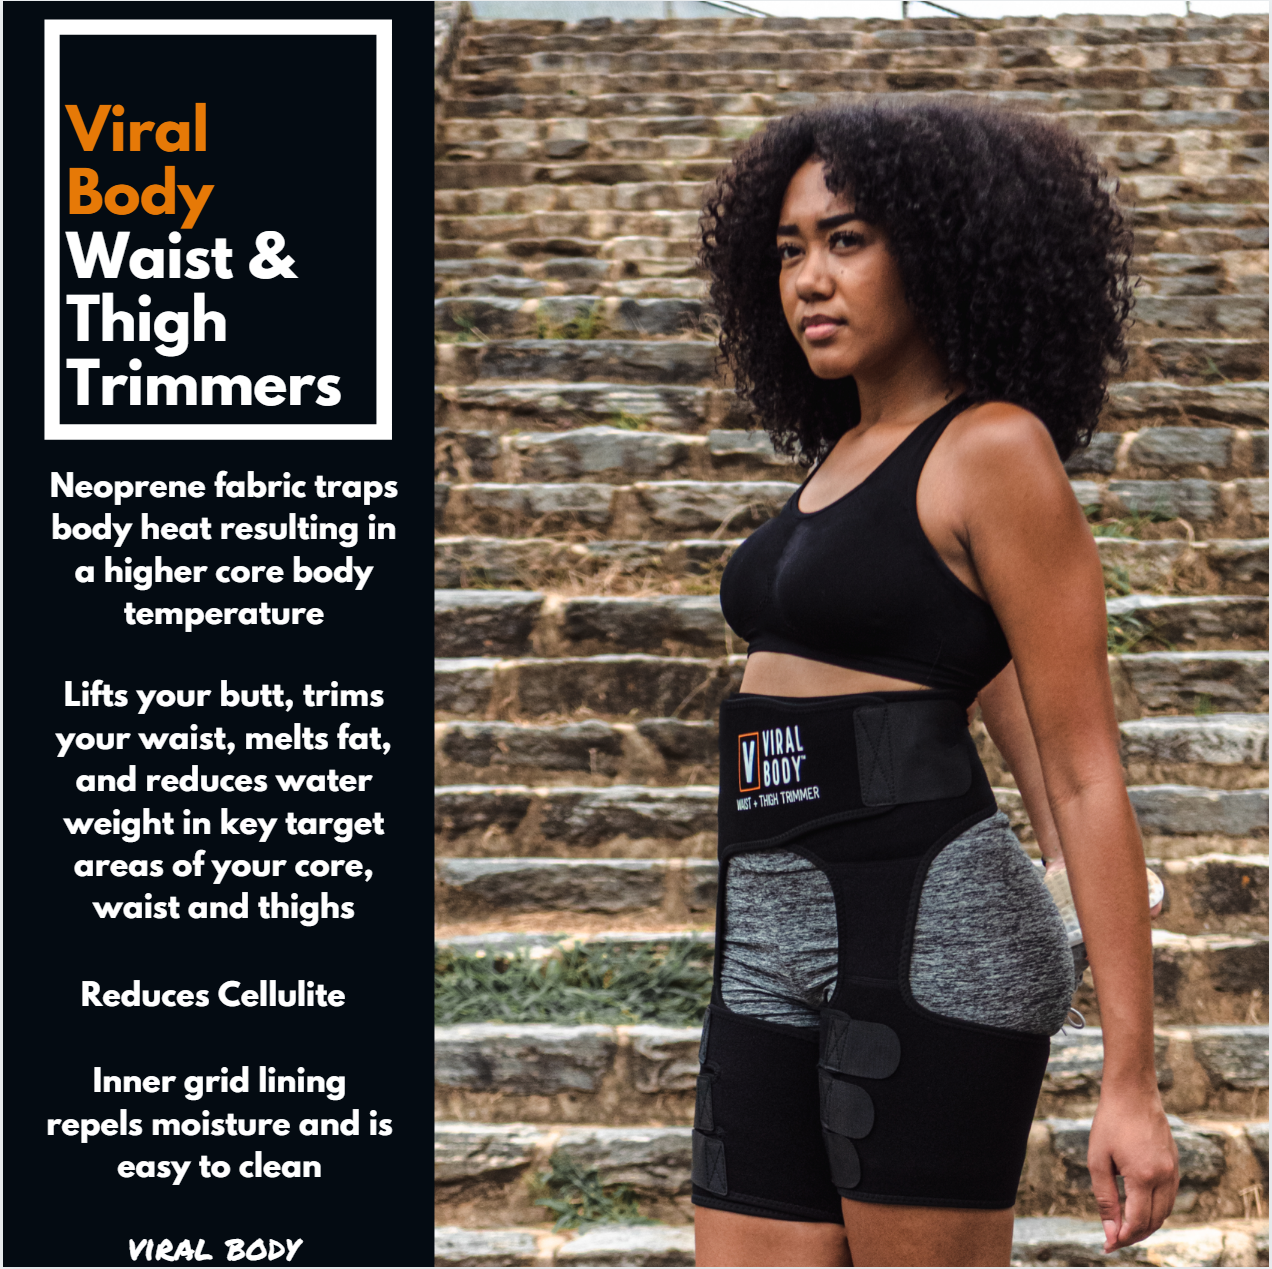 Viral Body® Premium 3-in-1 Waist and Thigh Trimmer with Butt Lifter